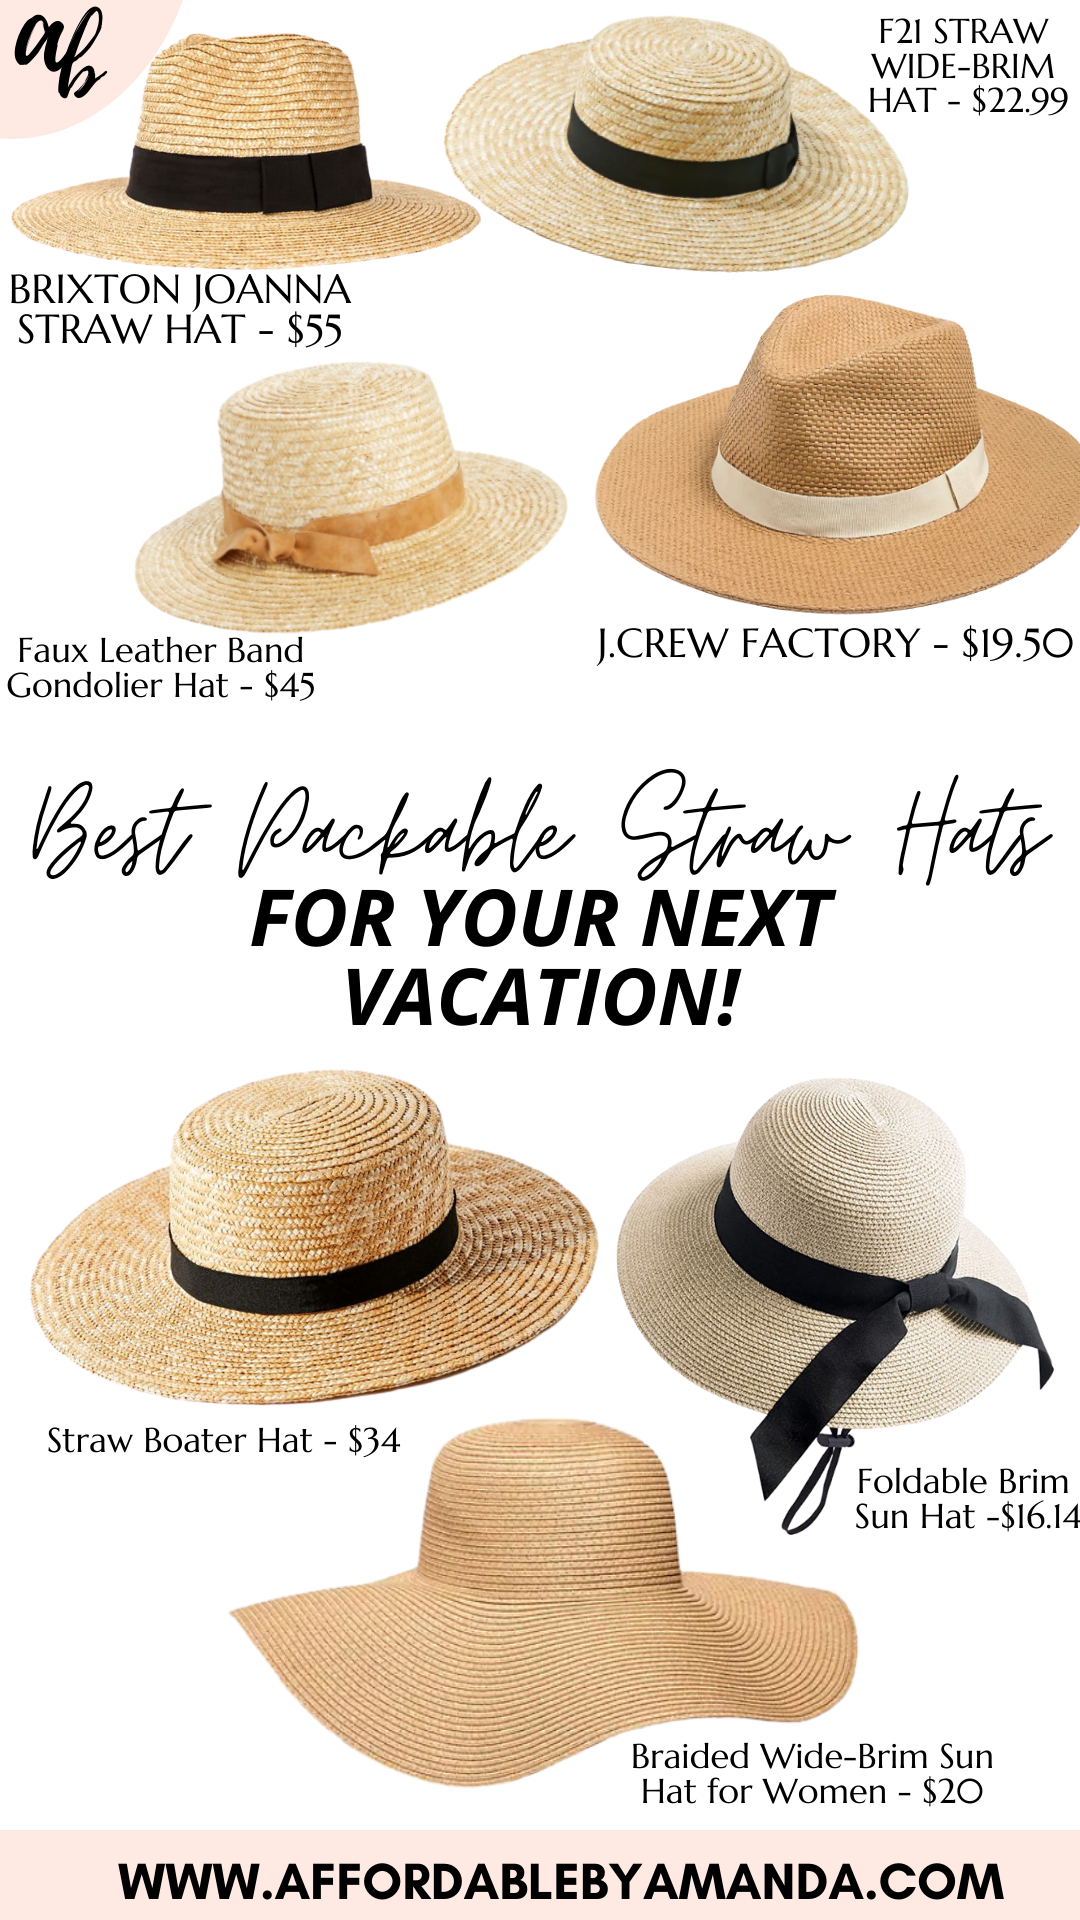 45 Packable Straw Sun Hats for Women - Affordable by Amanda